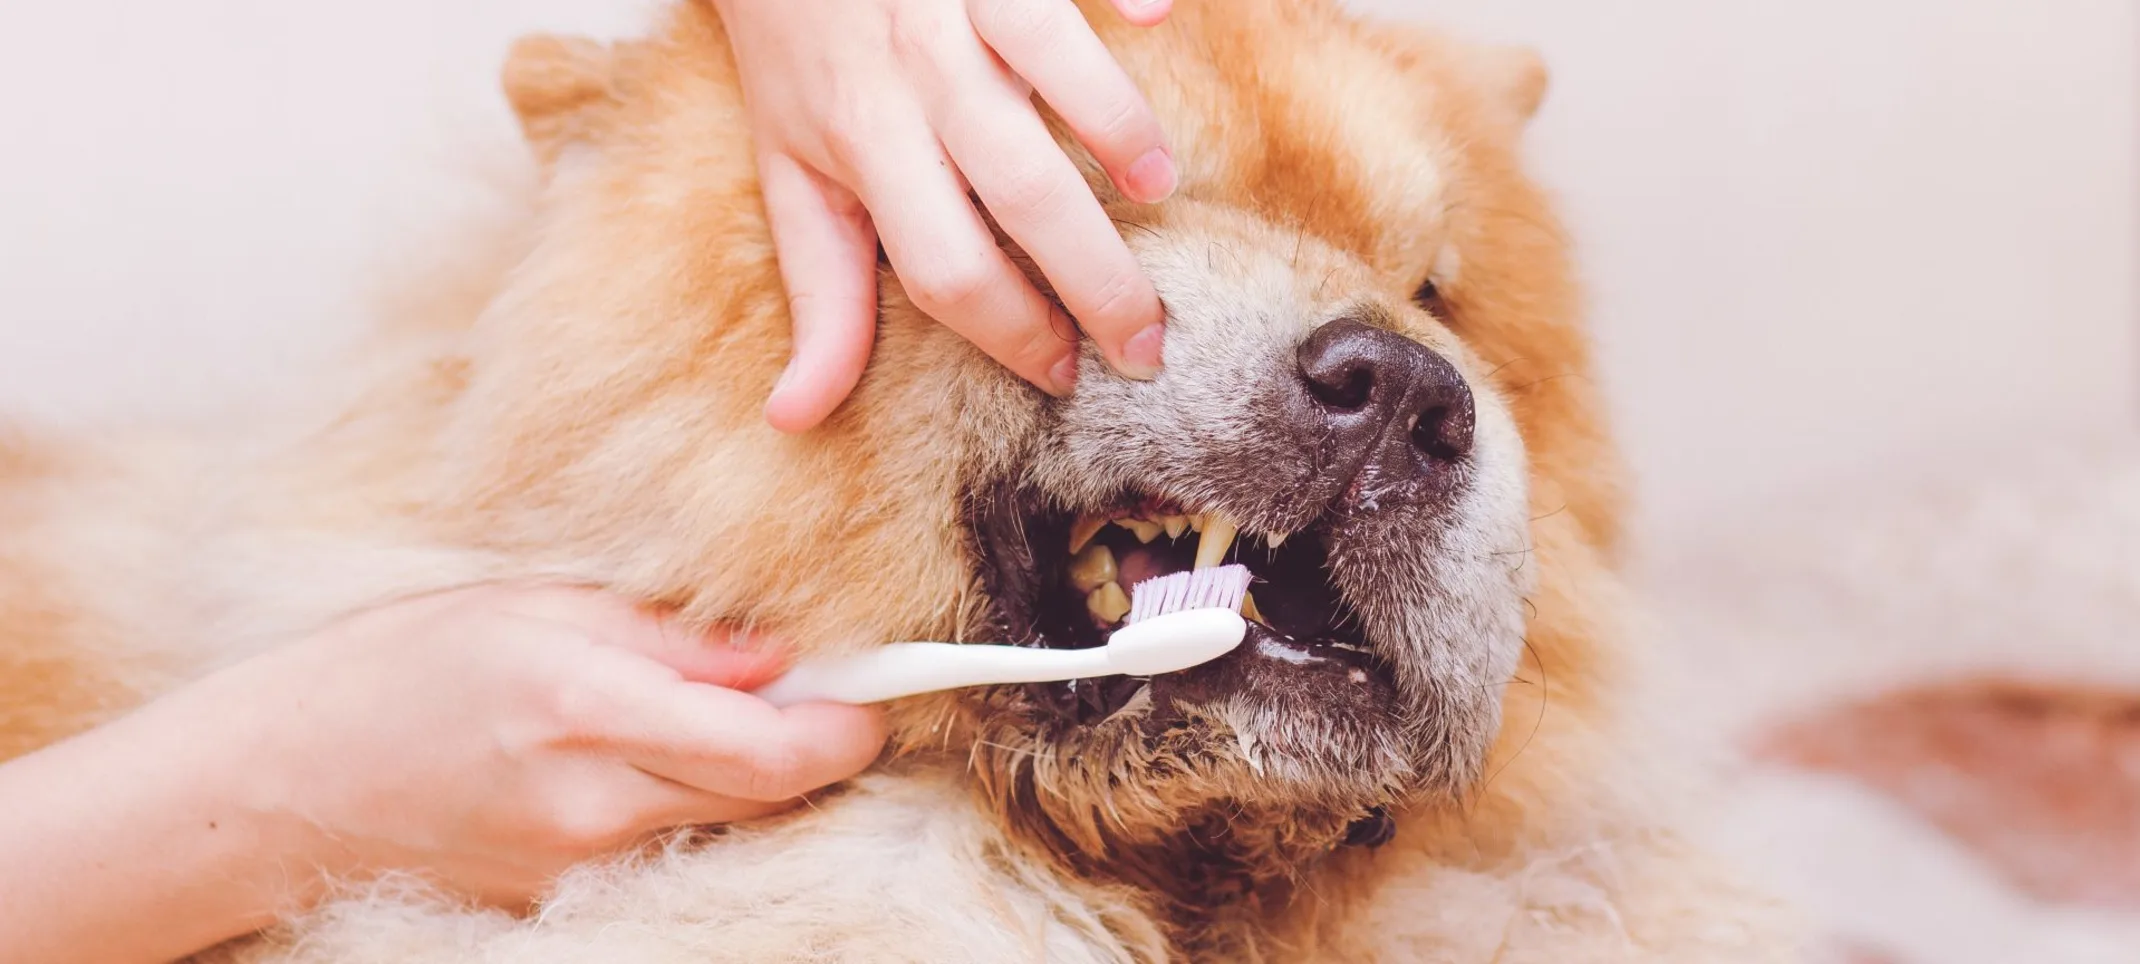 Dog getting its teeth brushed with toothbrush 